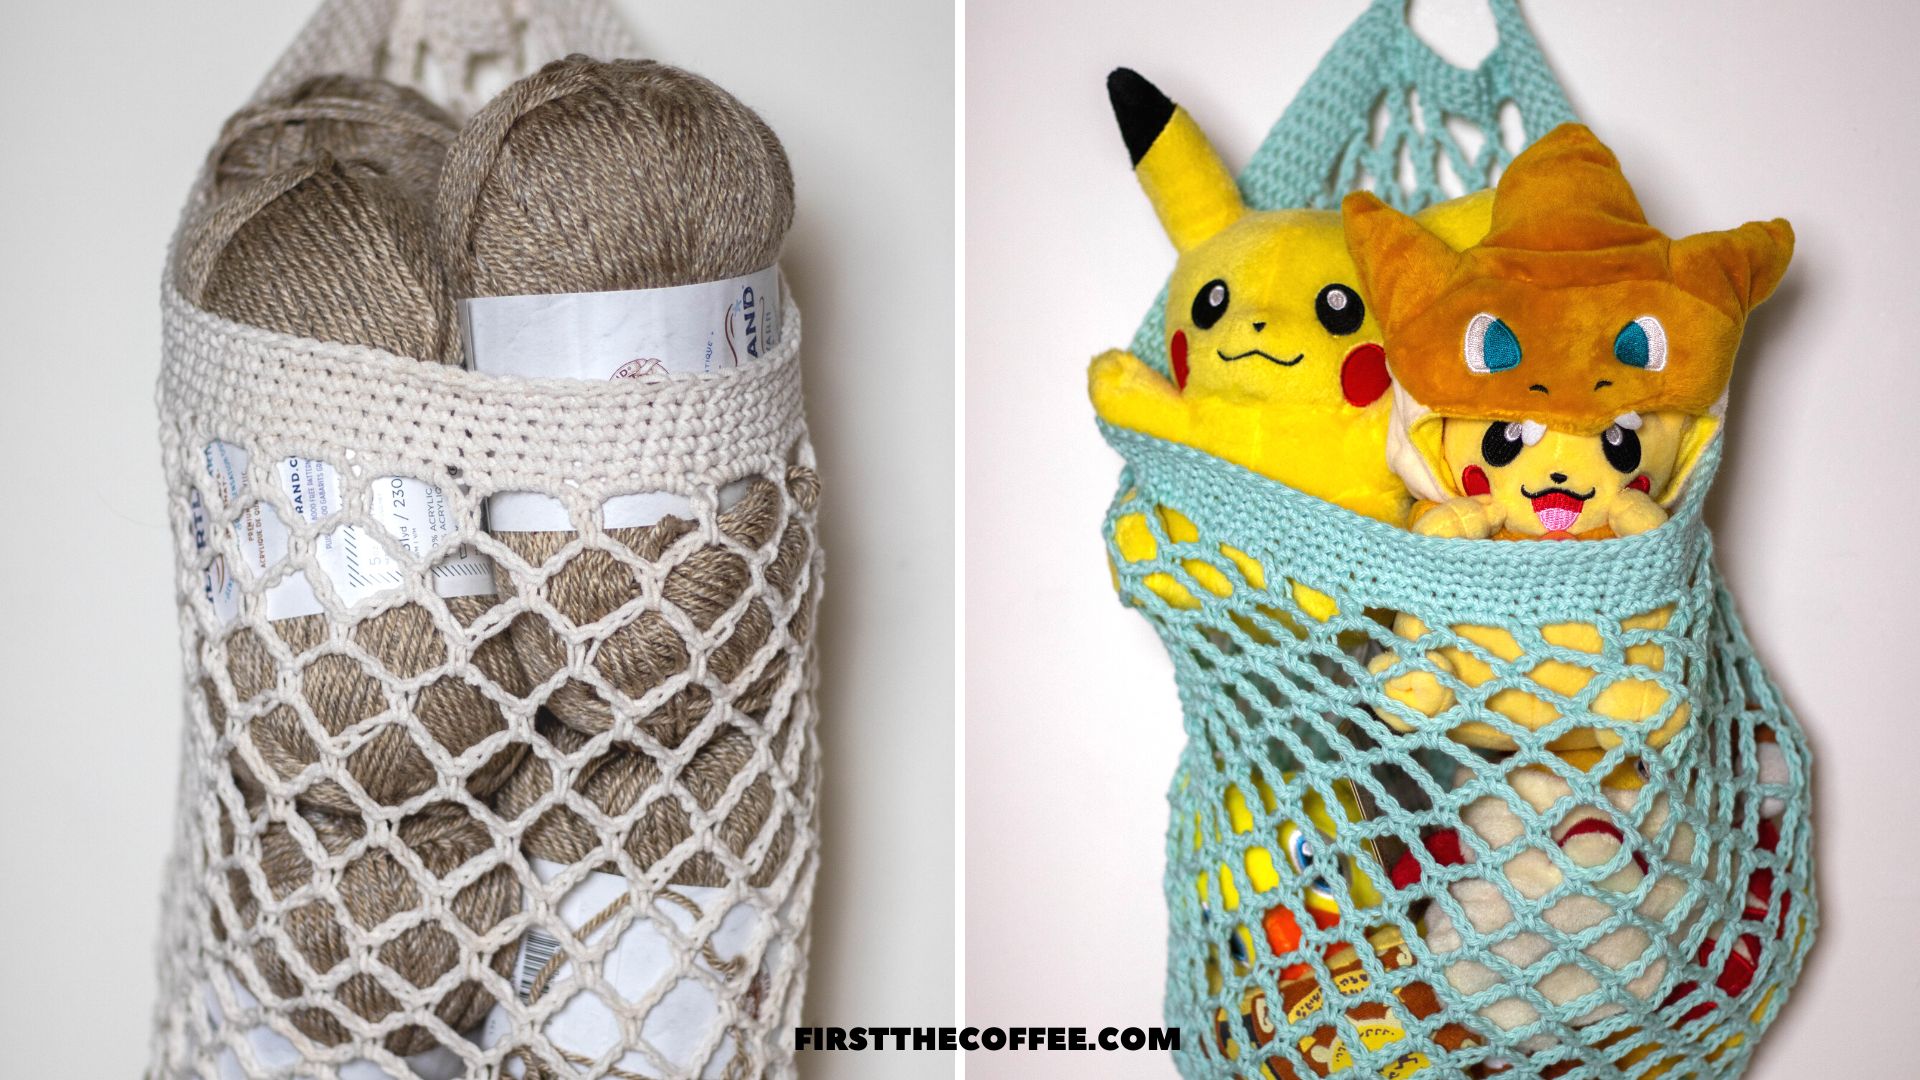 Crochet Hanging Storage Wall Baskets, one with yarn and another holding stuff Pikachus